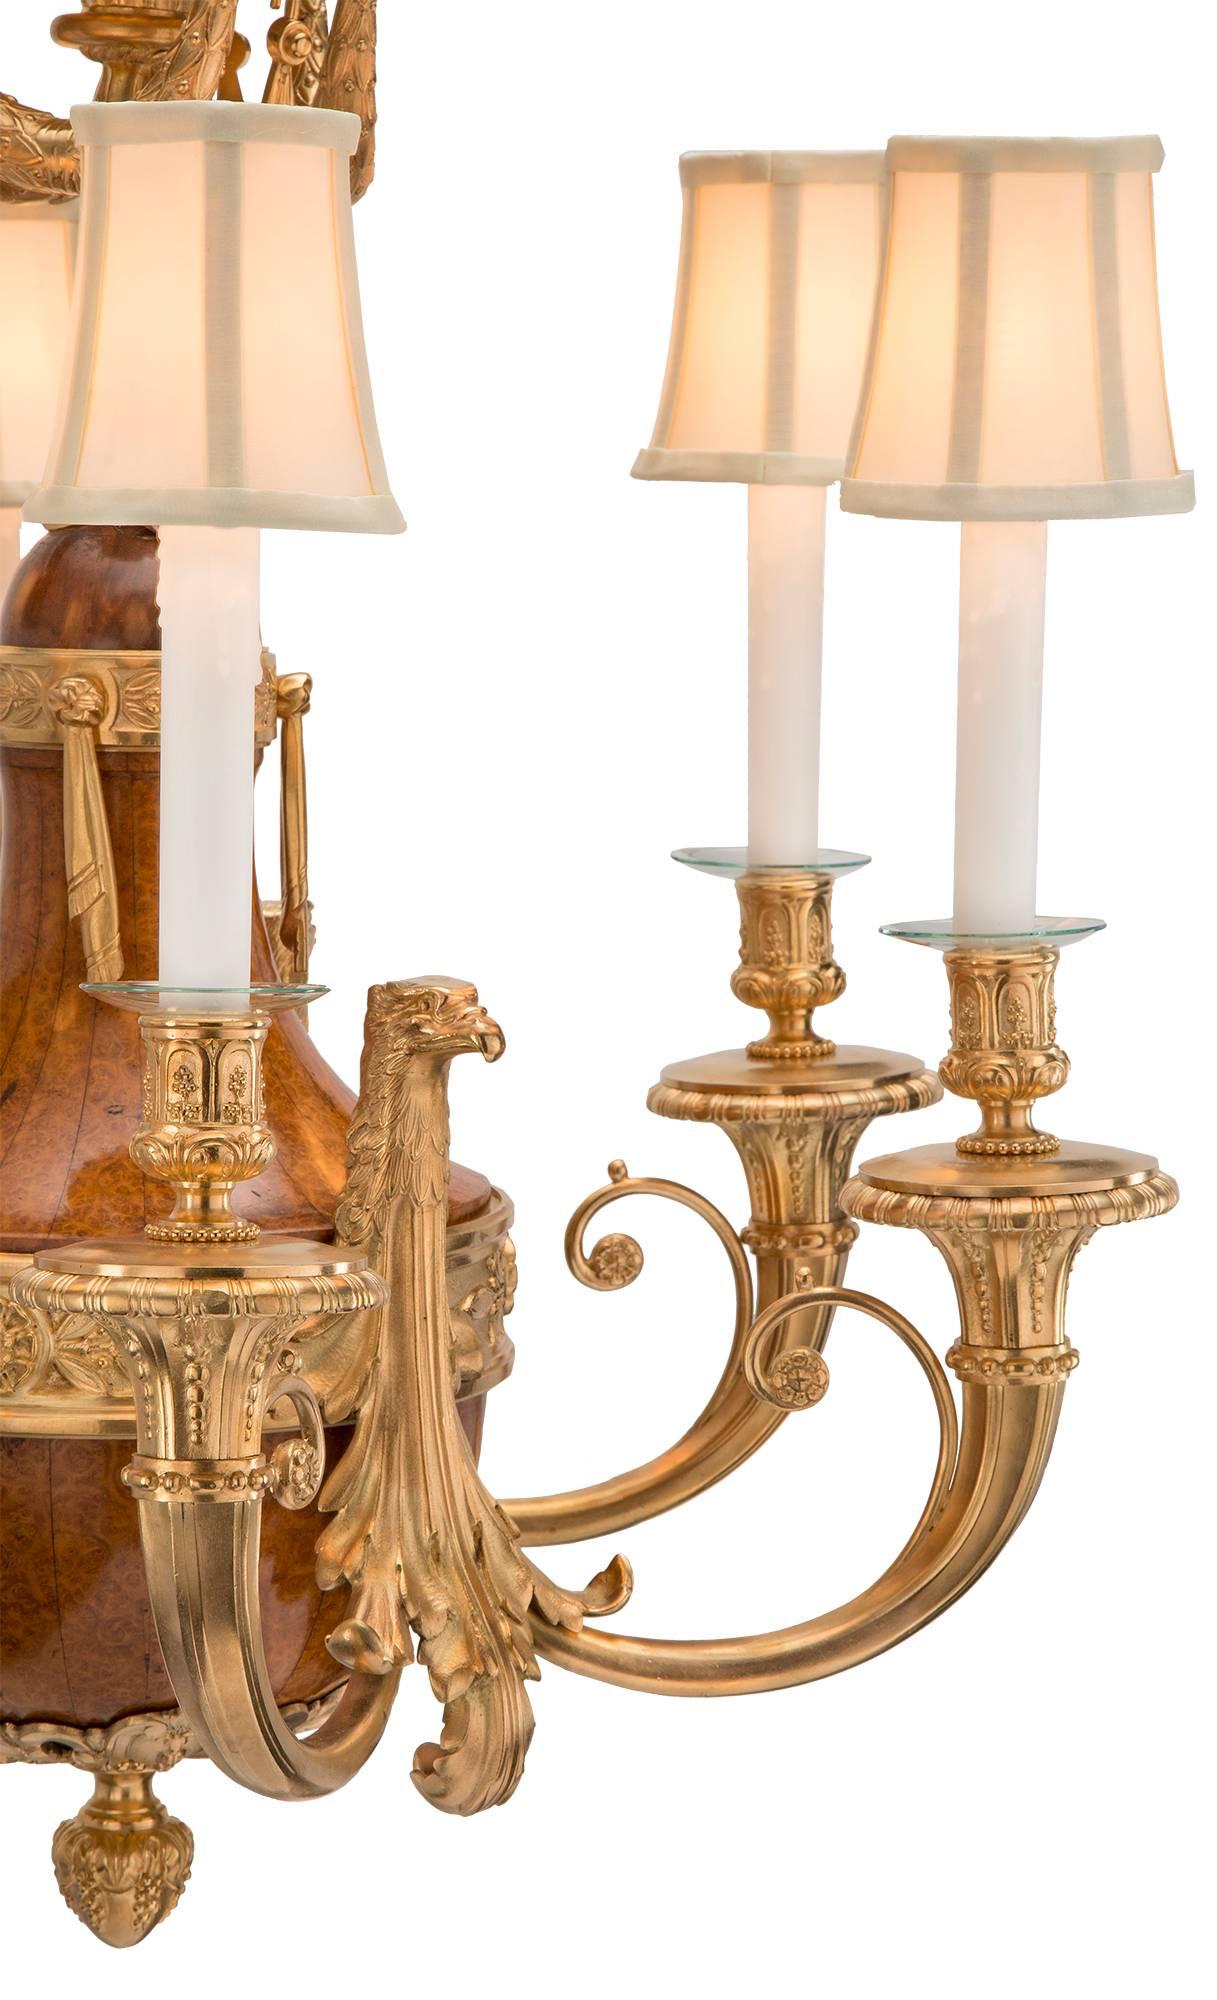 Neoclassical French 19th Century Neo-Classical St. Burl Walnut and Ormolu Chandelier